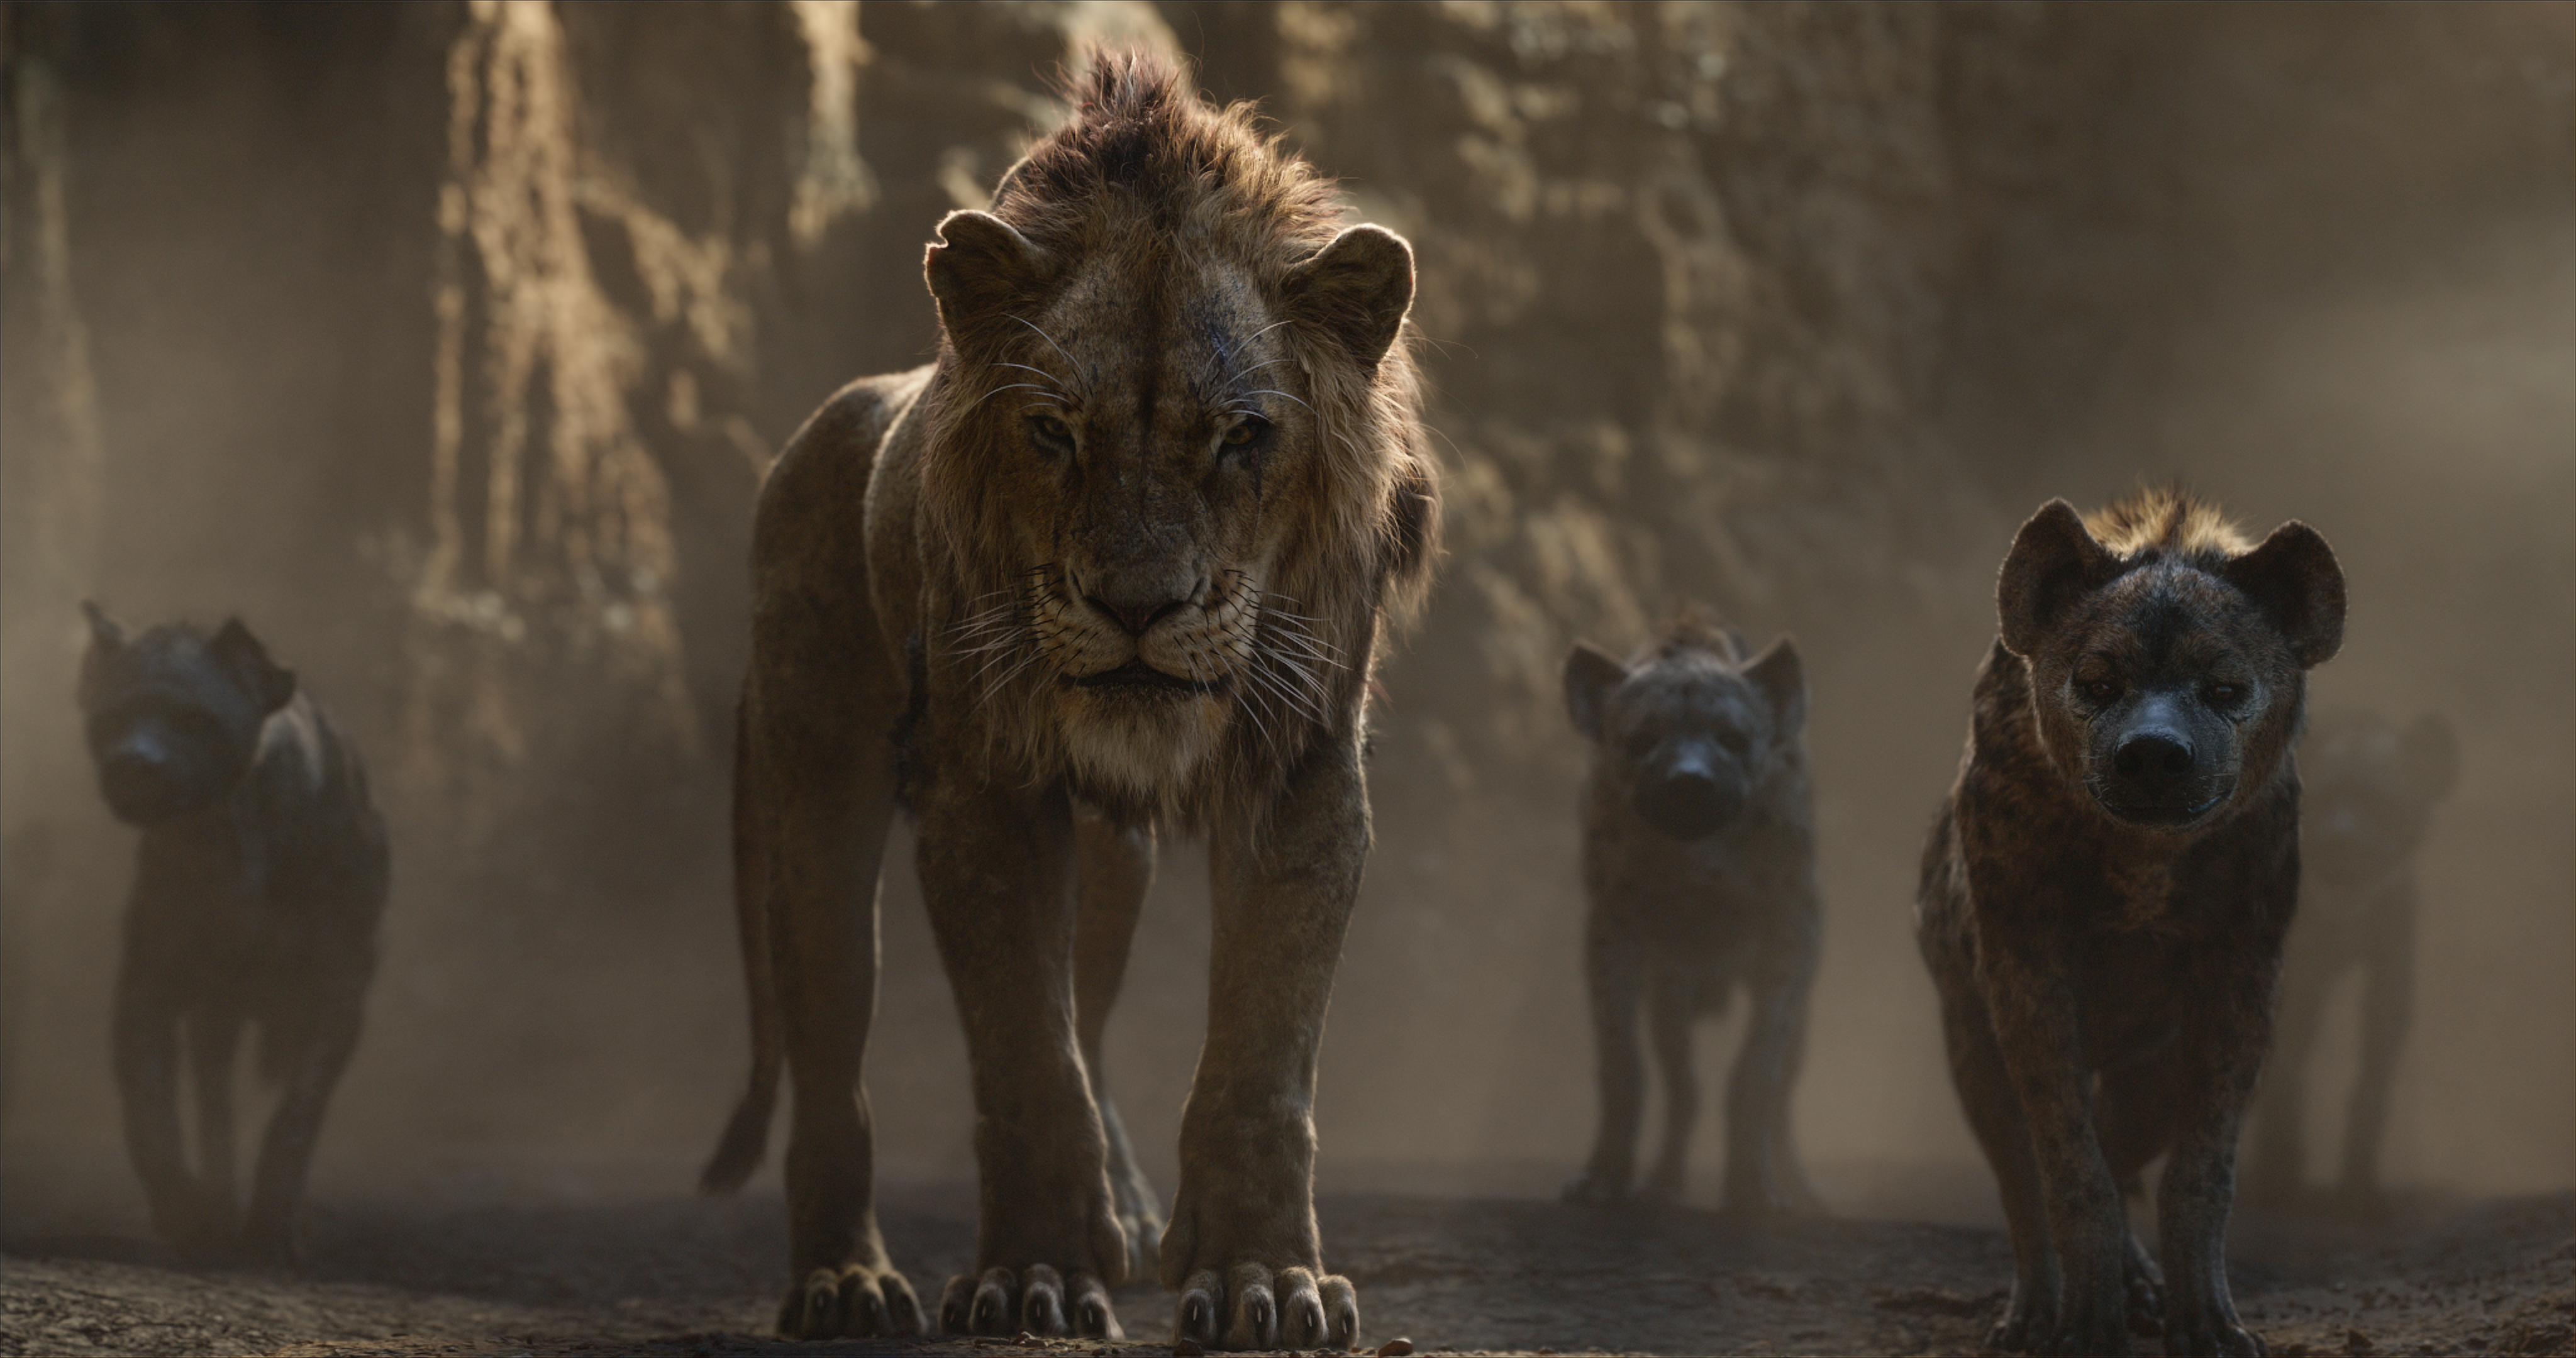 Scar The Lion King The Lion King 2019 4096x2160